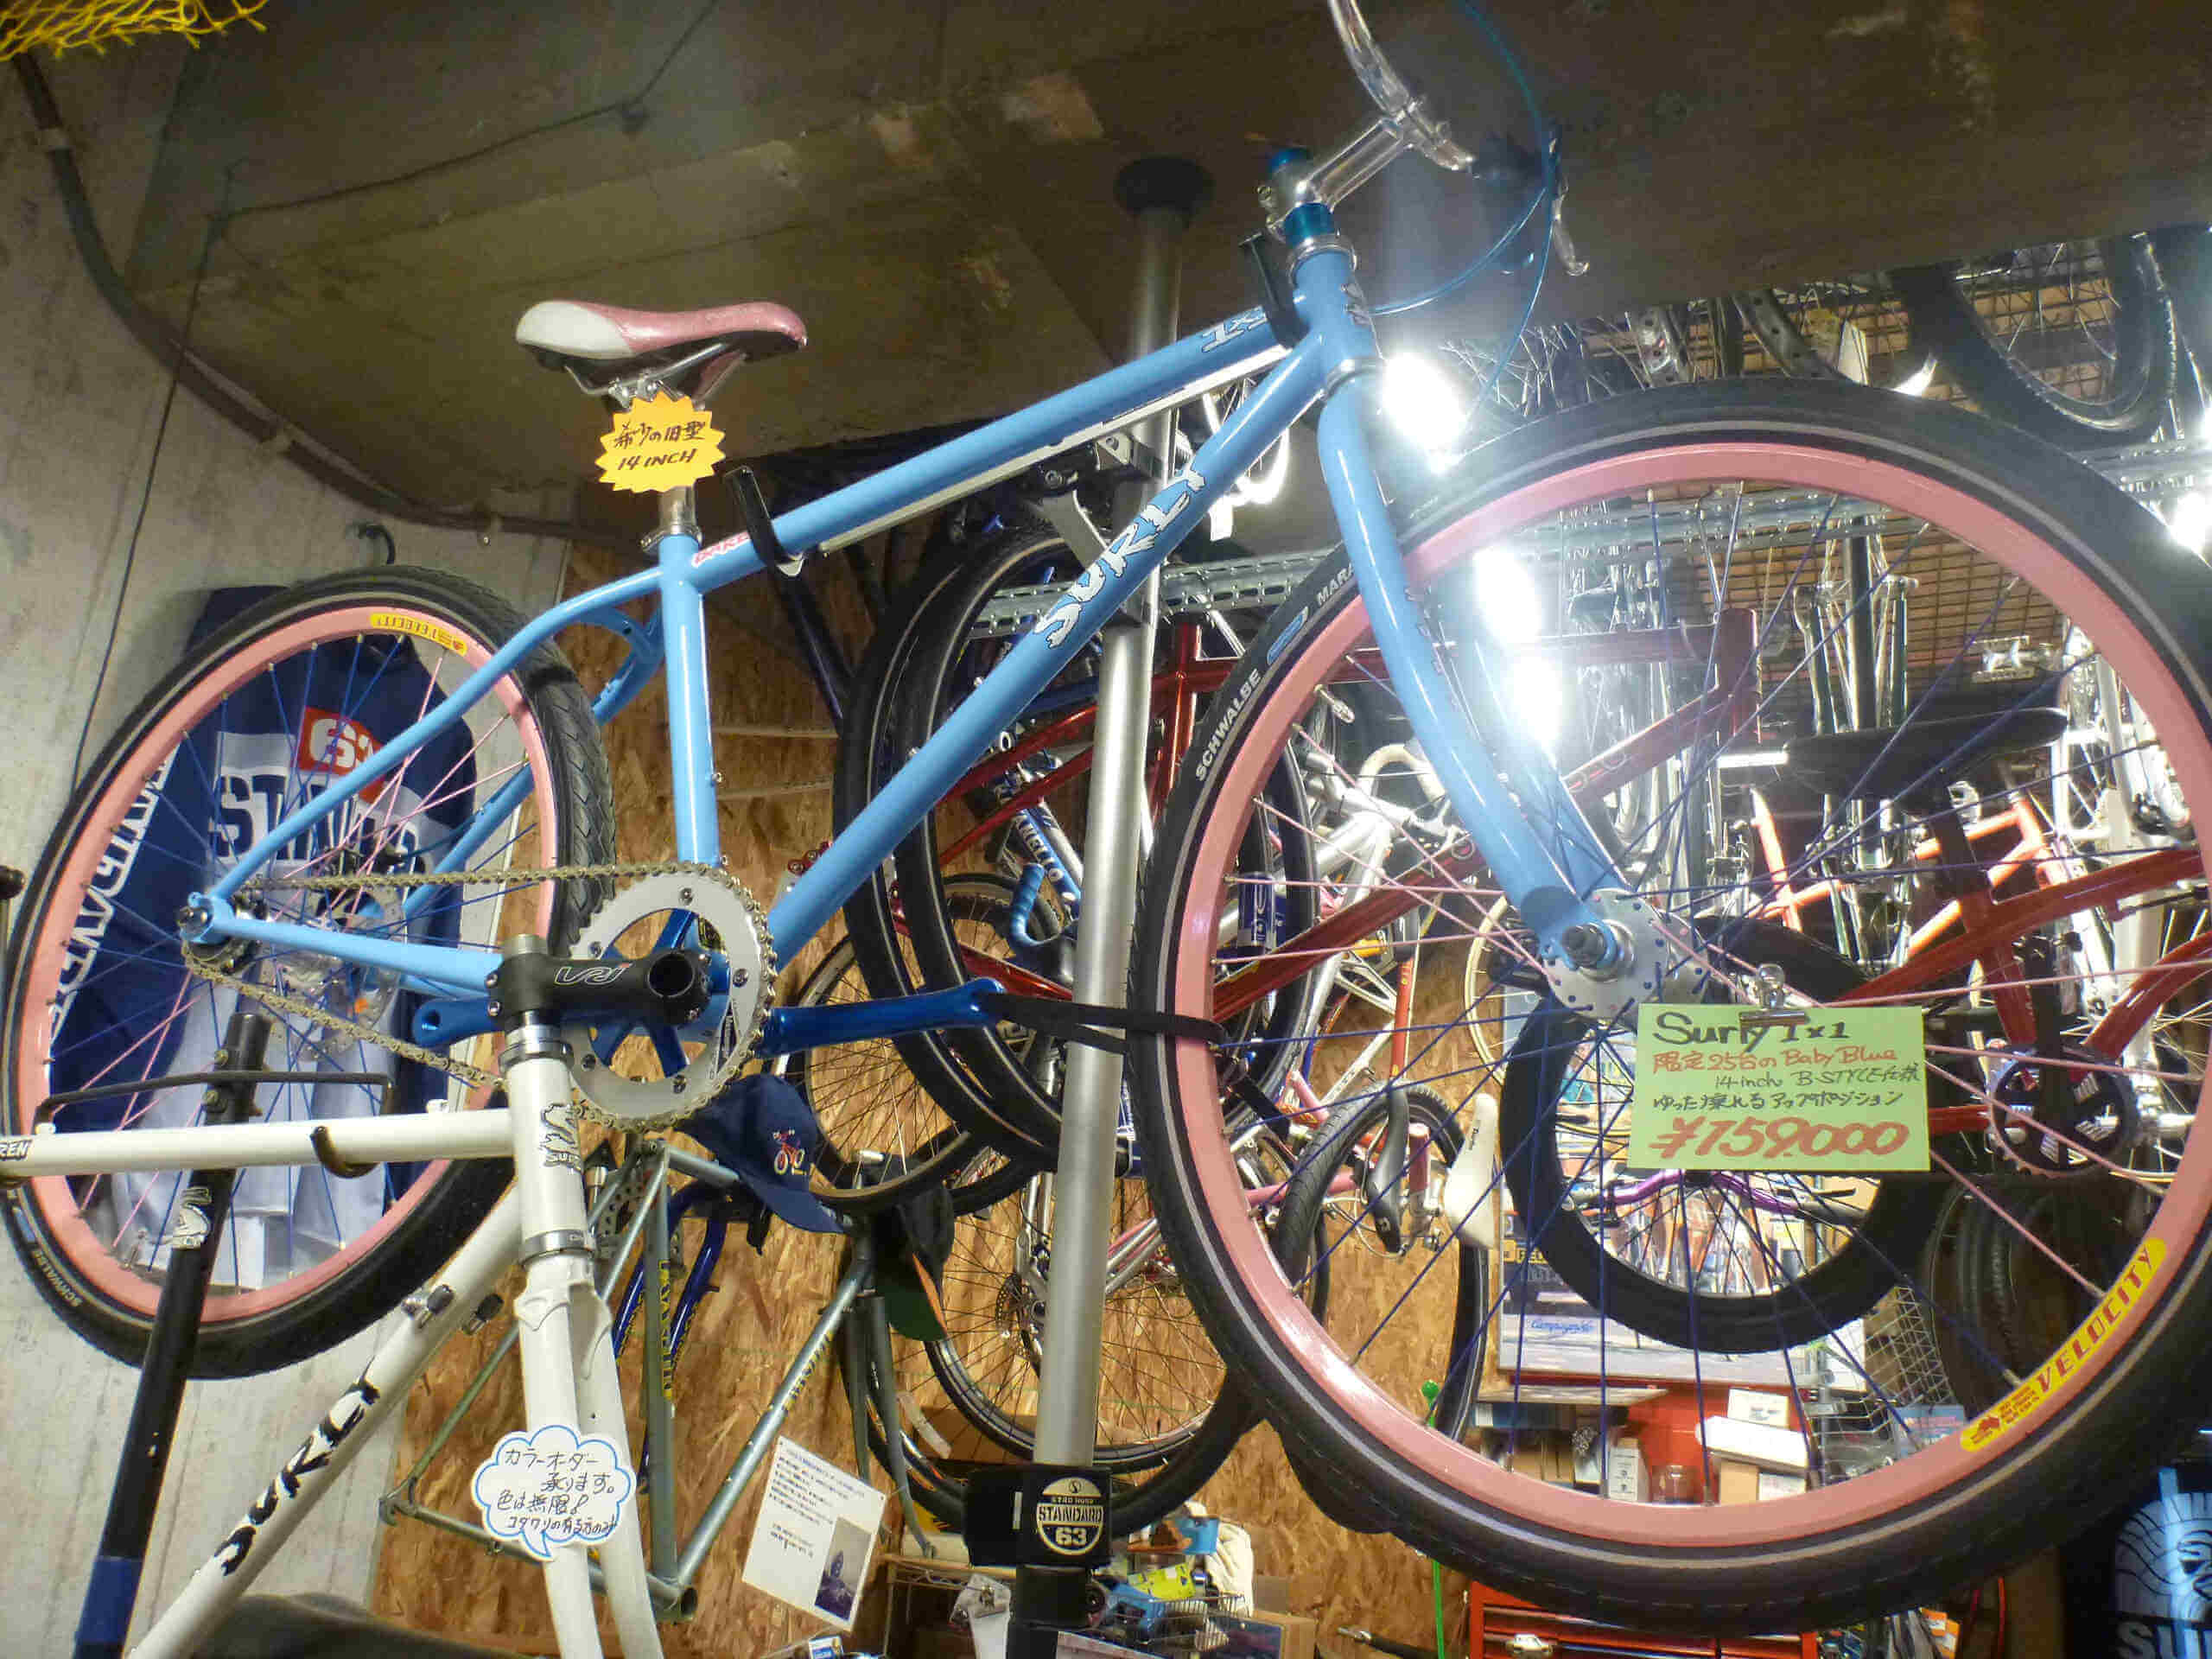 Upward, right side view of a light blue Surly 1x1 bike, hanging from a rack in a bike shop